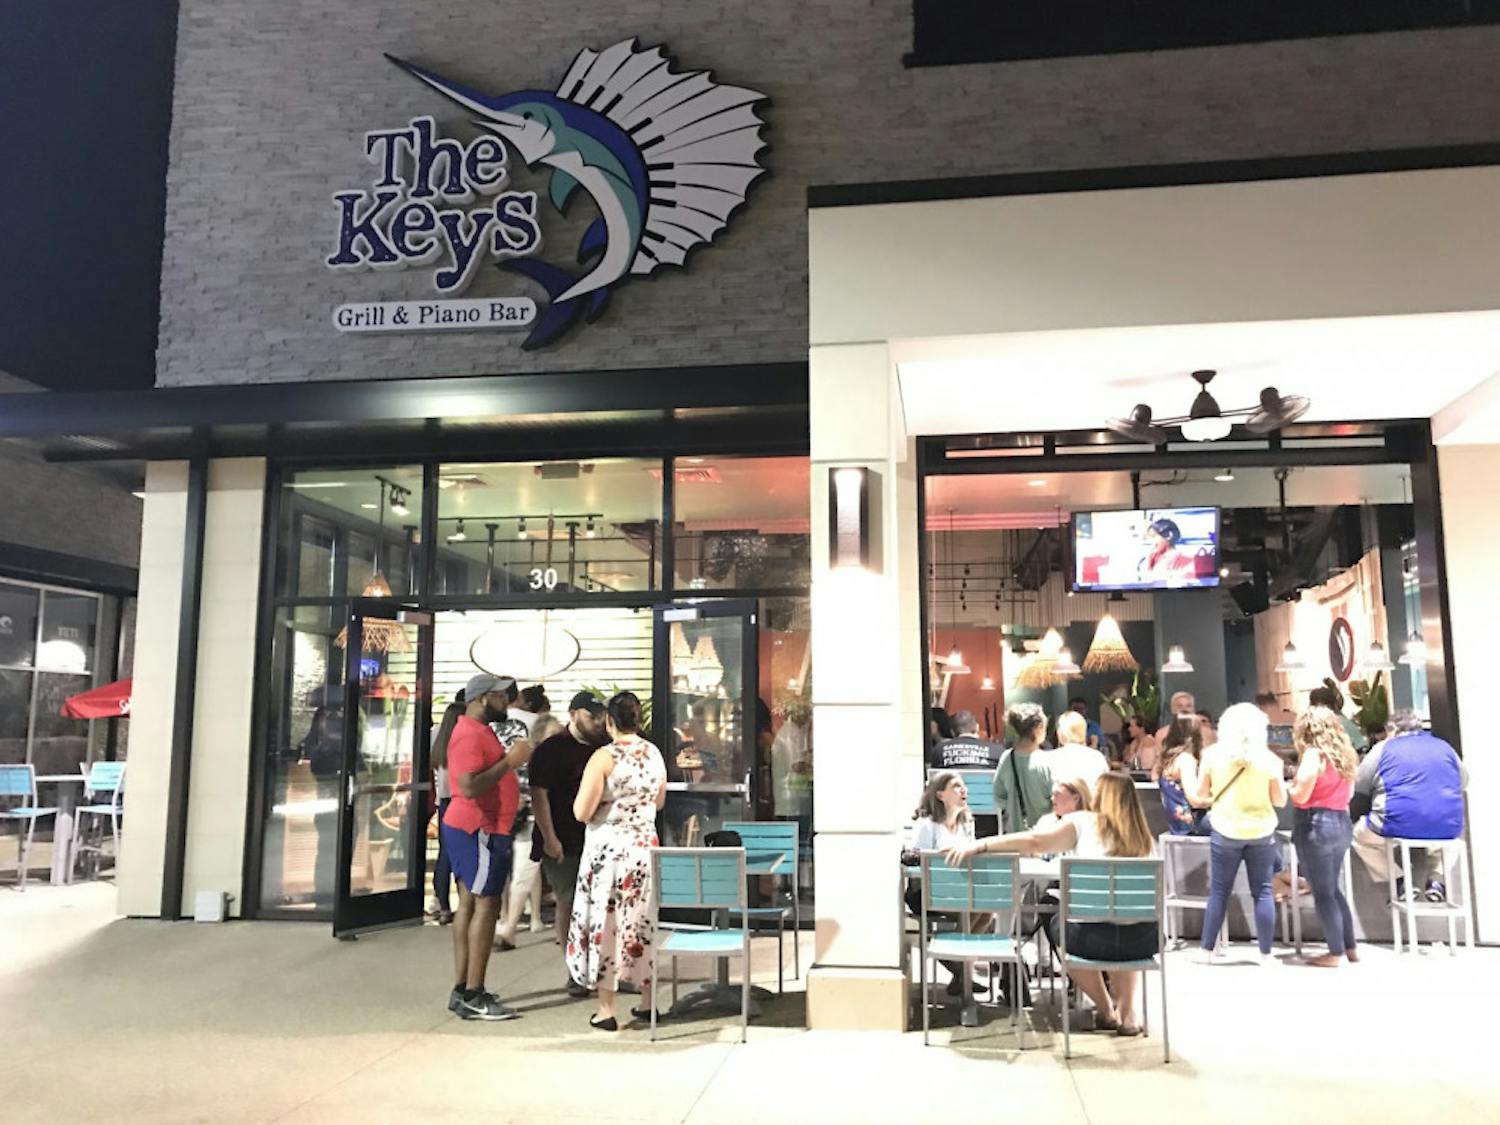 The Keys, a new seafood restaurant and entertainment venue, held its grand opening at Celebration Pointe on Wednesday evening. Originally scheduled to open on Sept. 2, the date was pushed back due to Hurricane Dorian. 